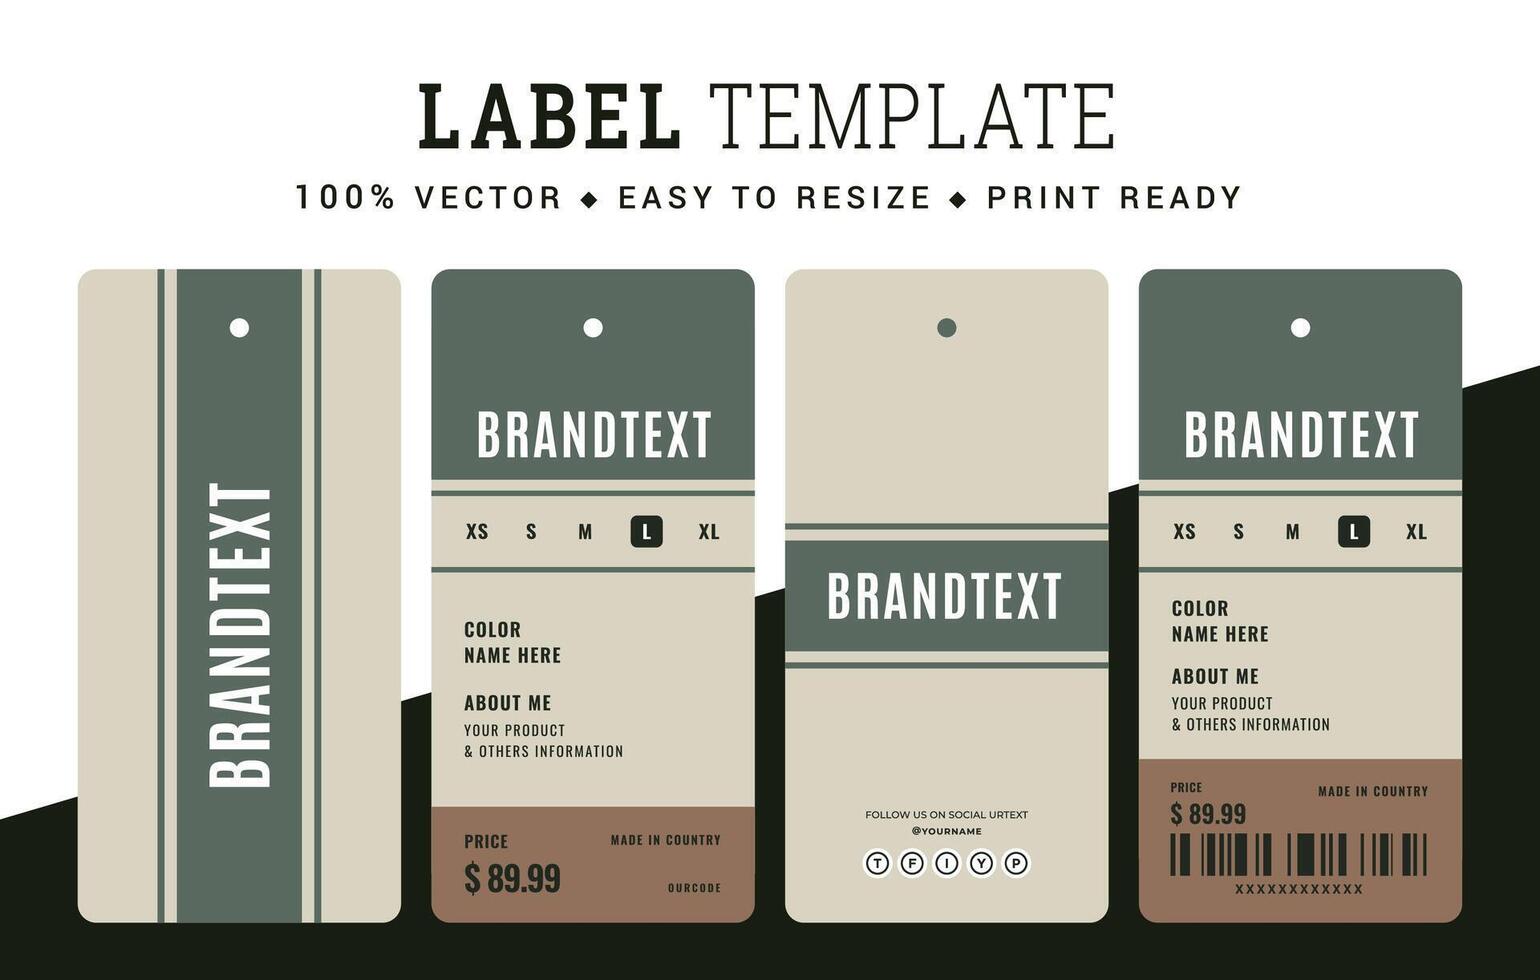 Hang tag label and price tag apparel care label design innovation garments accessories sustainability packaging design and vintage fashion product. vector